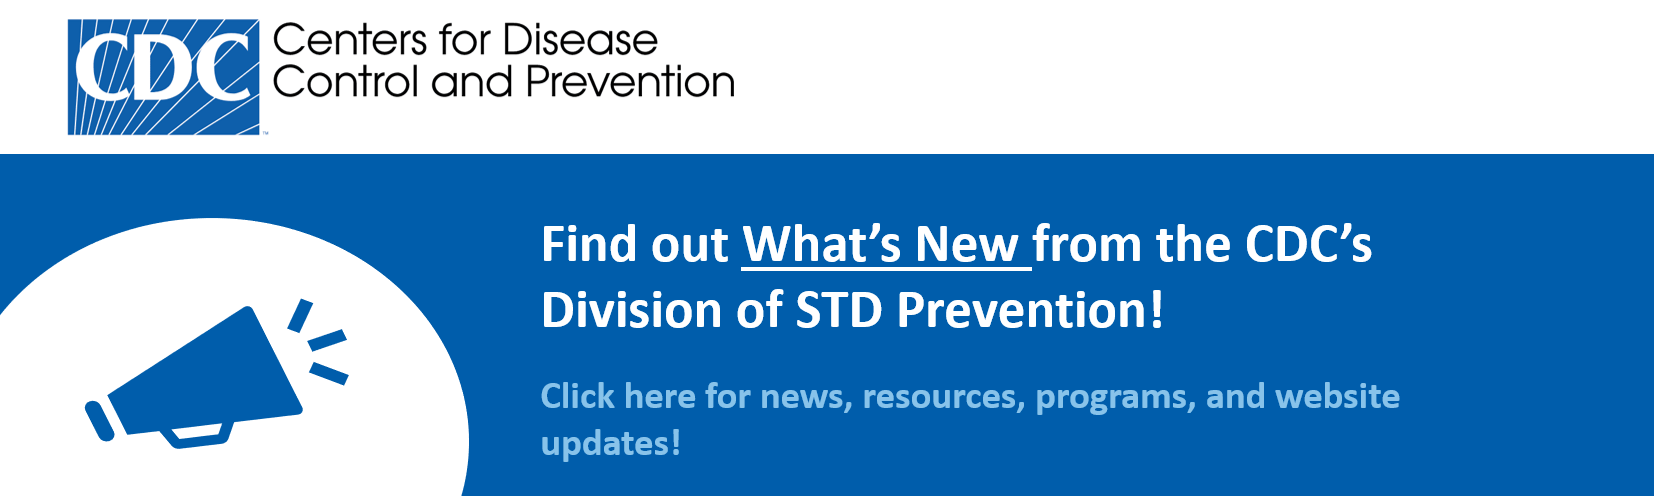 CDC Division of STD Prevention